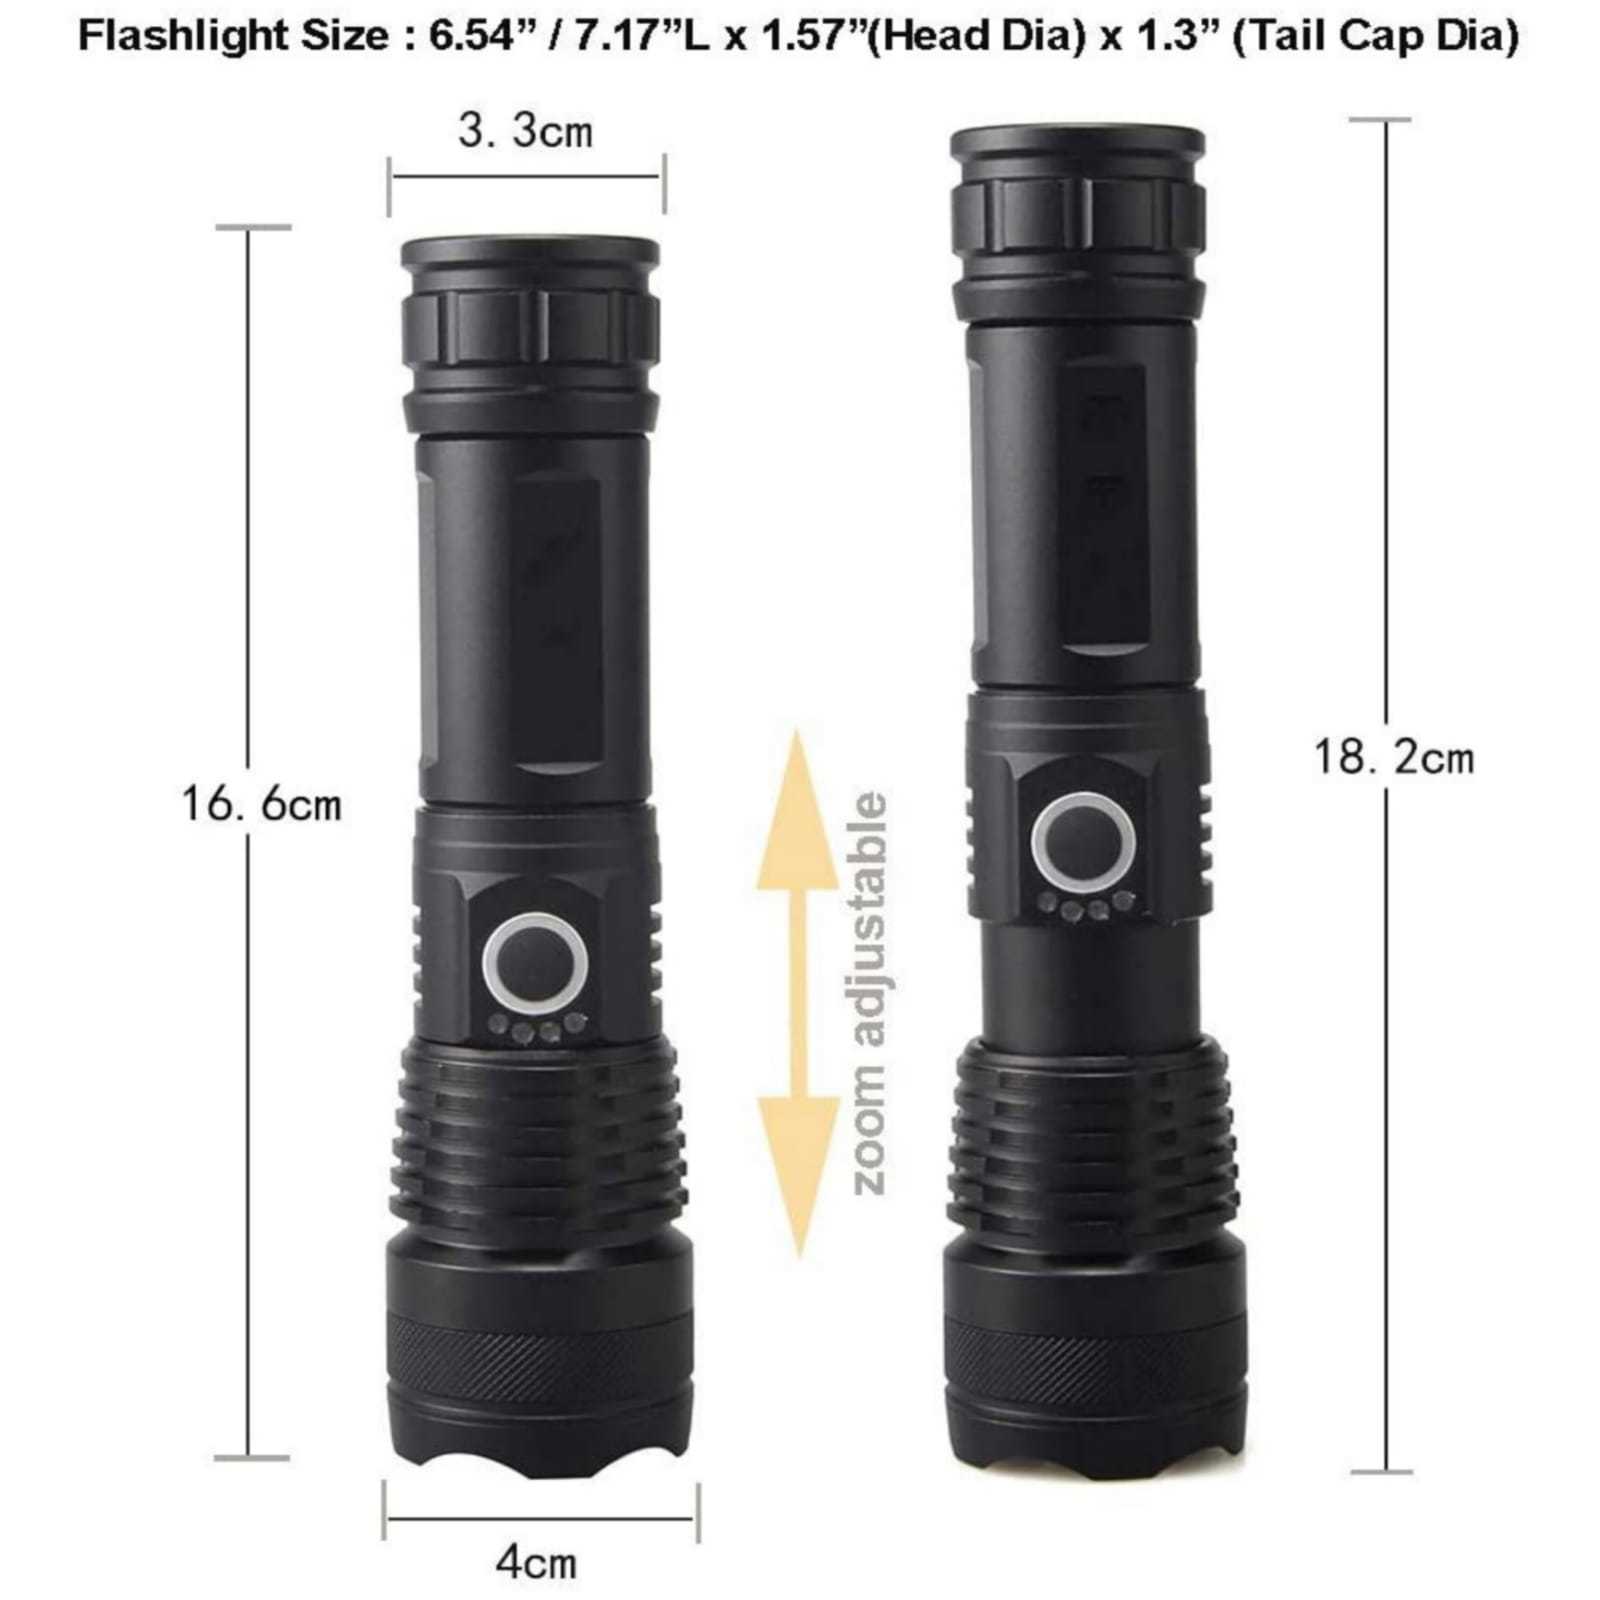 High Power Waterproof Flashlight Zoom able Focus (HISXHP50Z 20W)